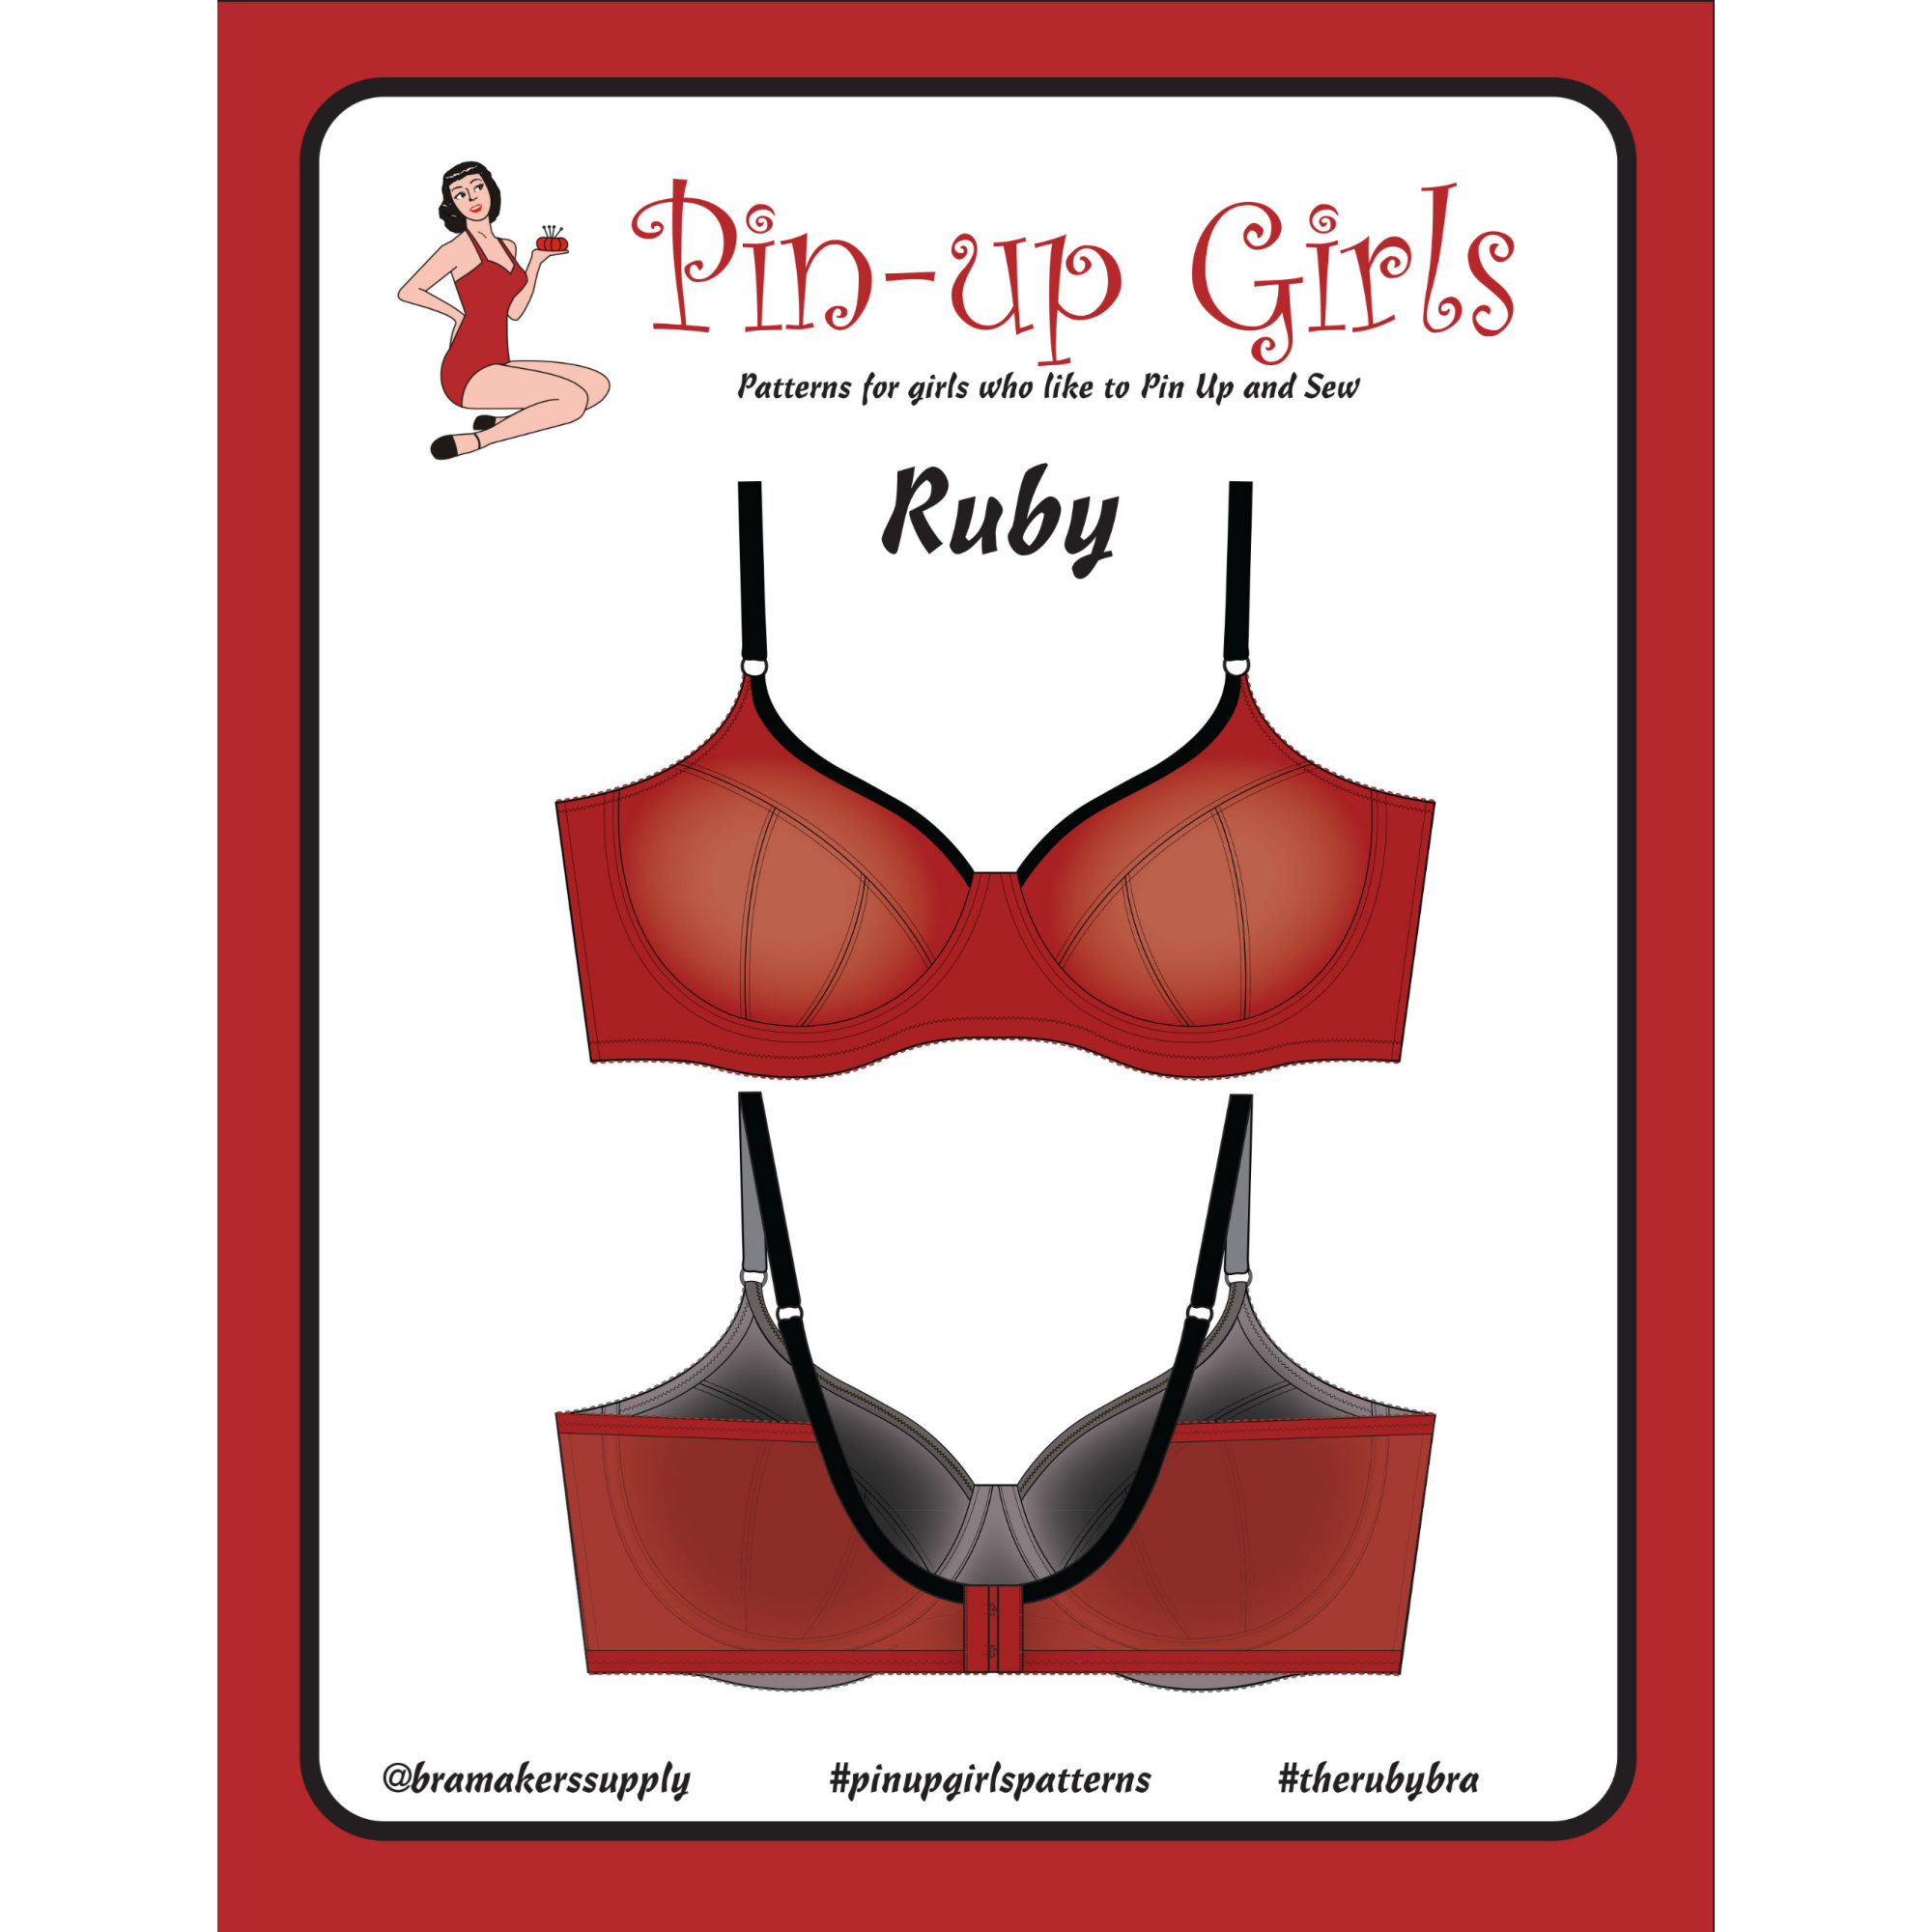 Bra Findings Kit for the Sweet Sixteen Bralette Pattern and Make